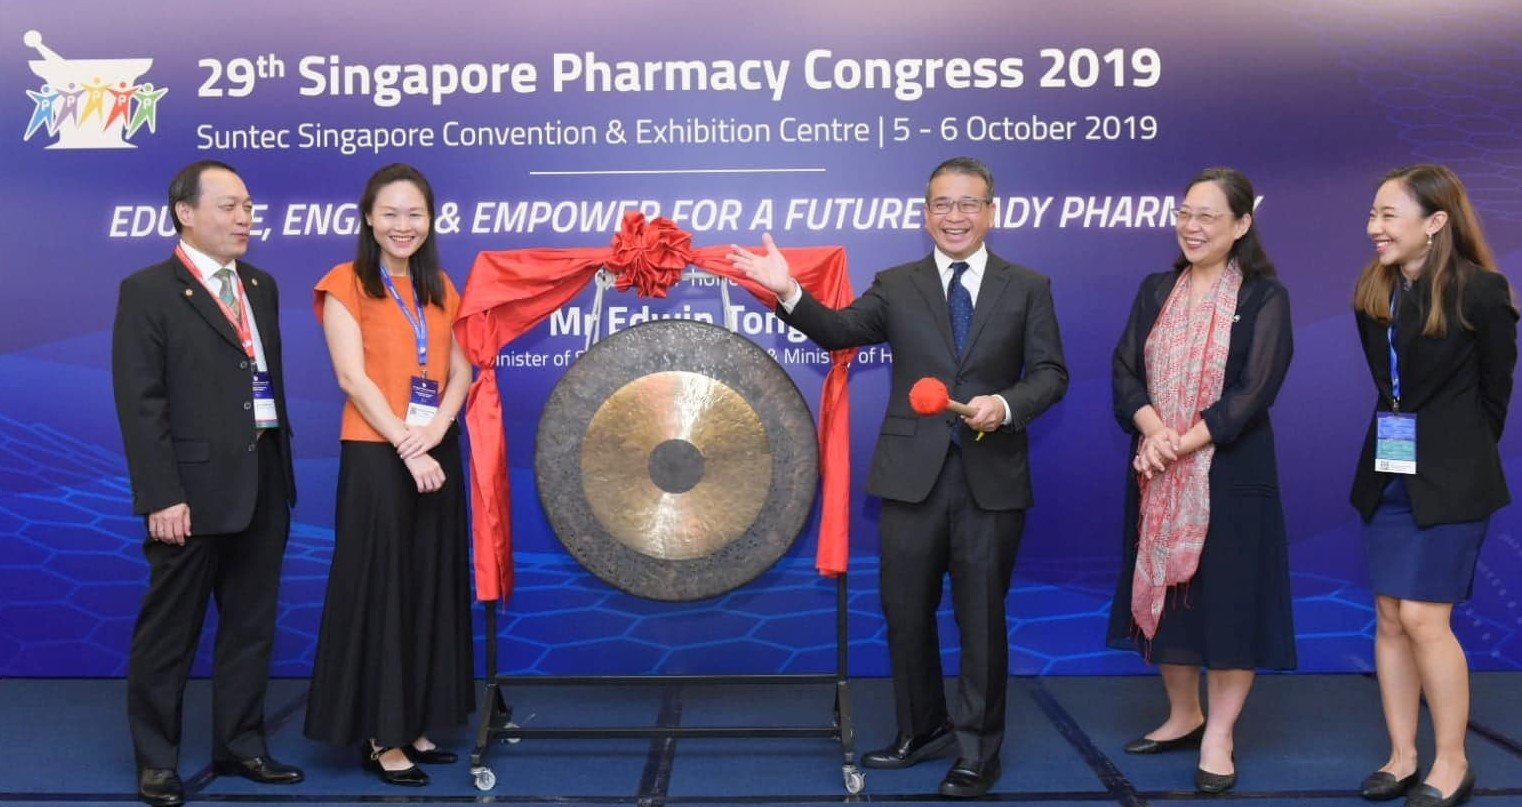 Photo credit: Pharmaceutical Society of Singapore (PSS) 